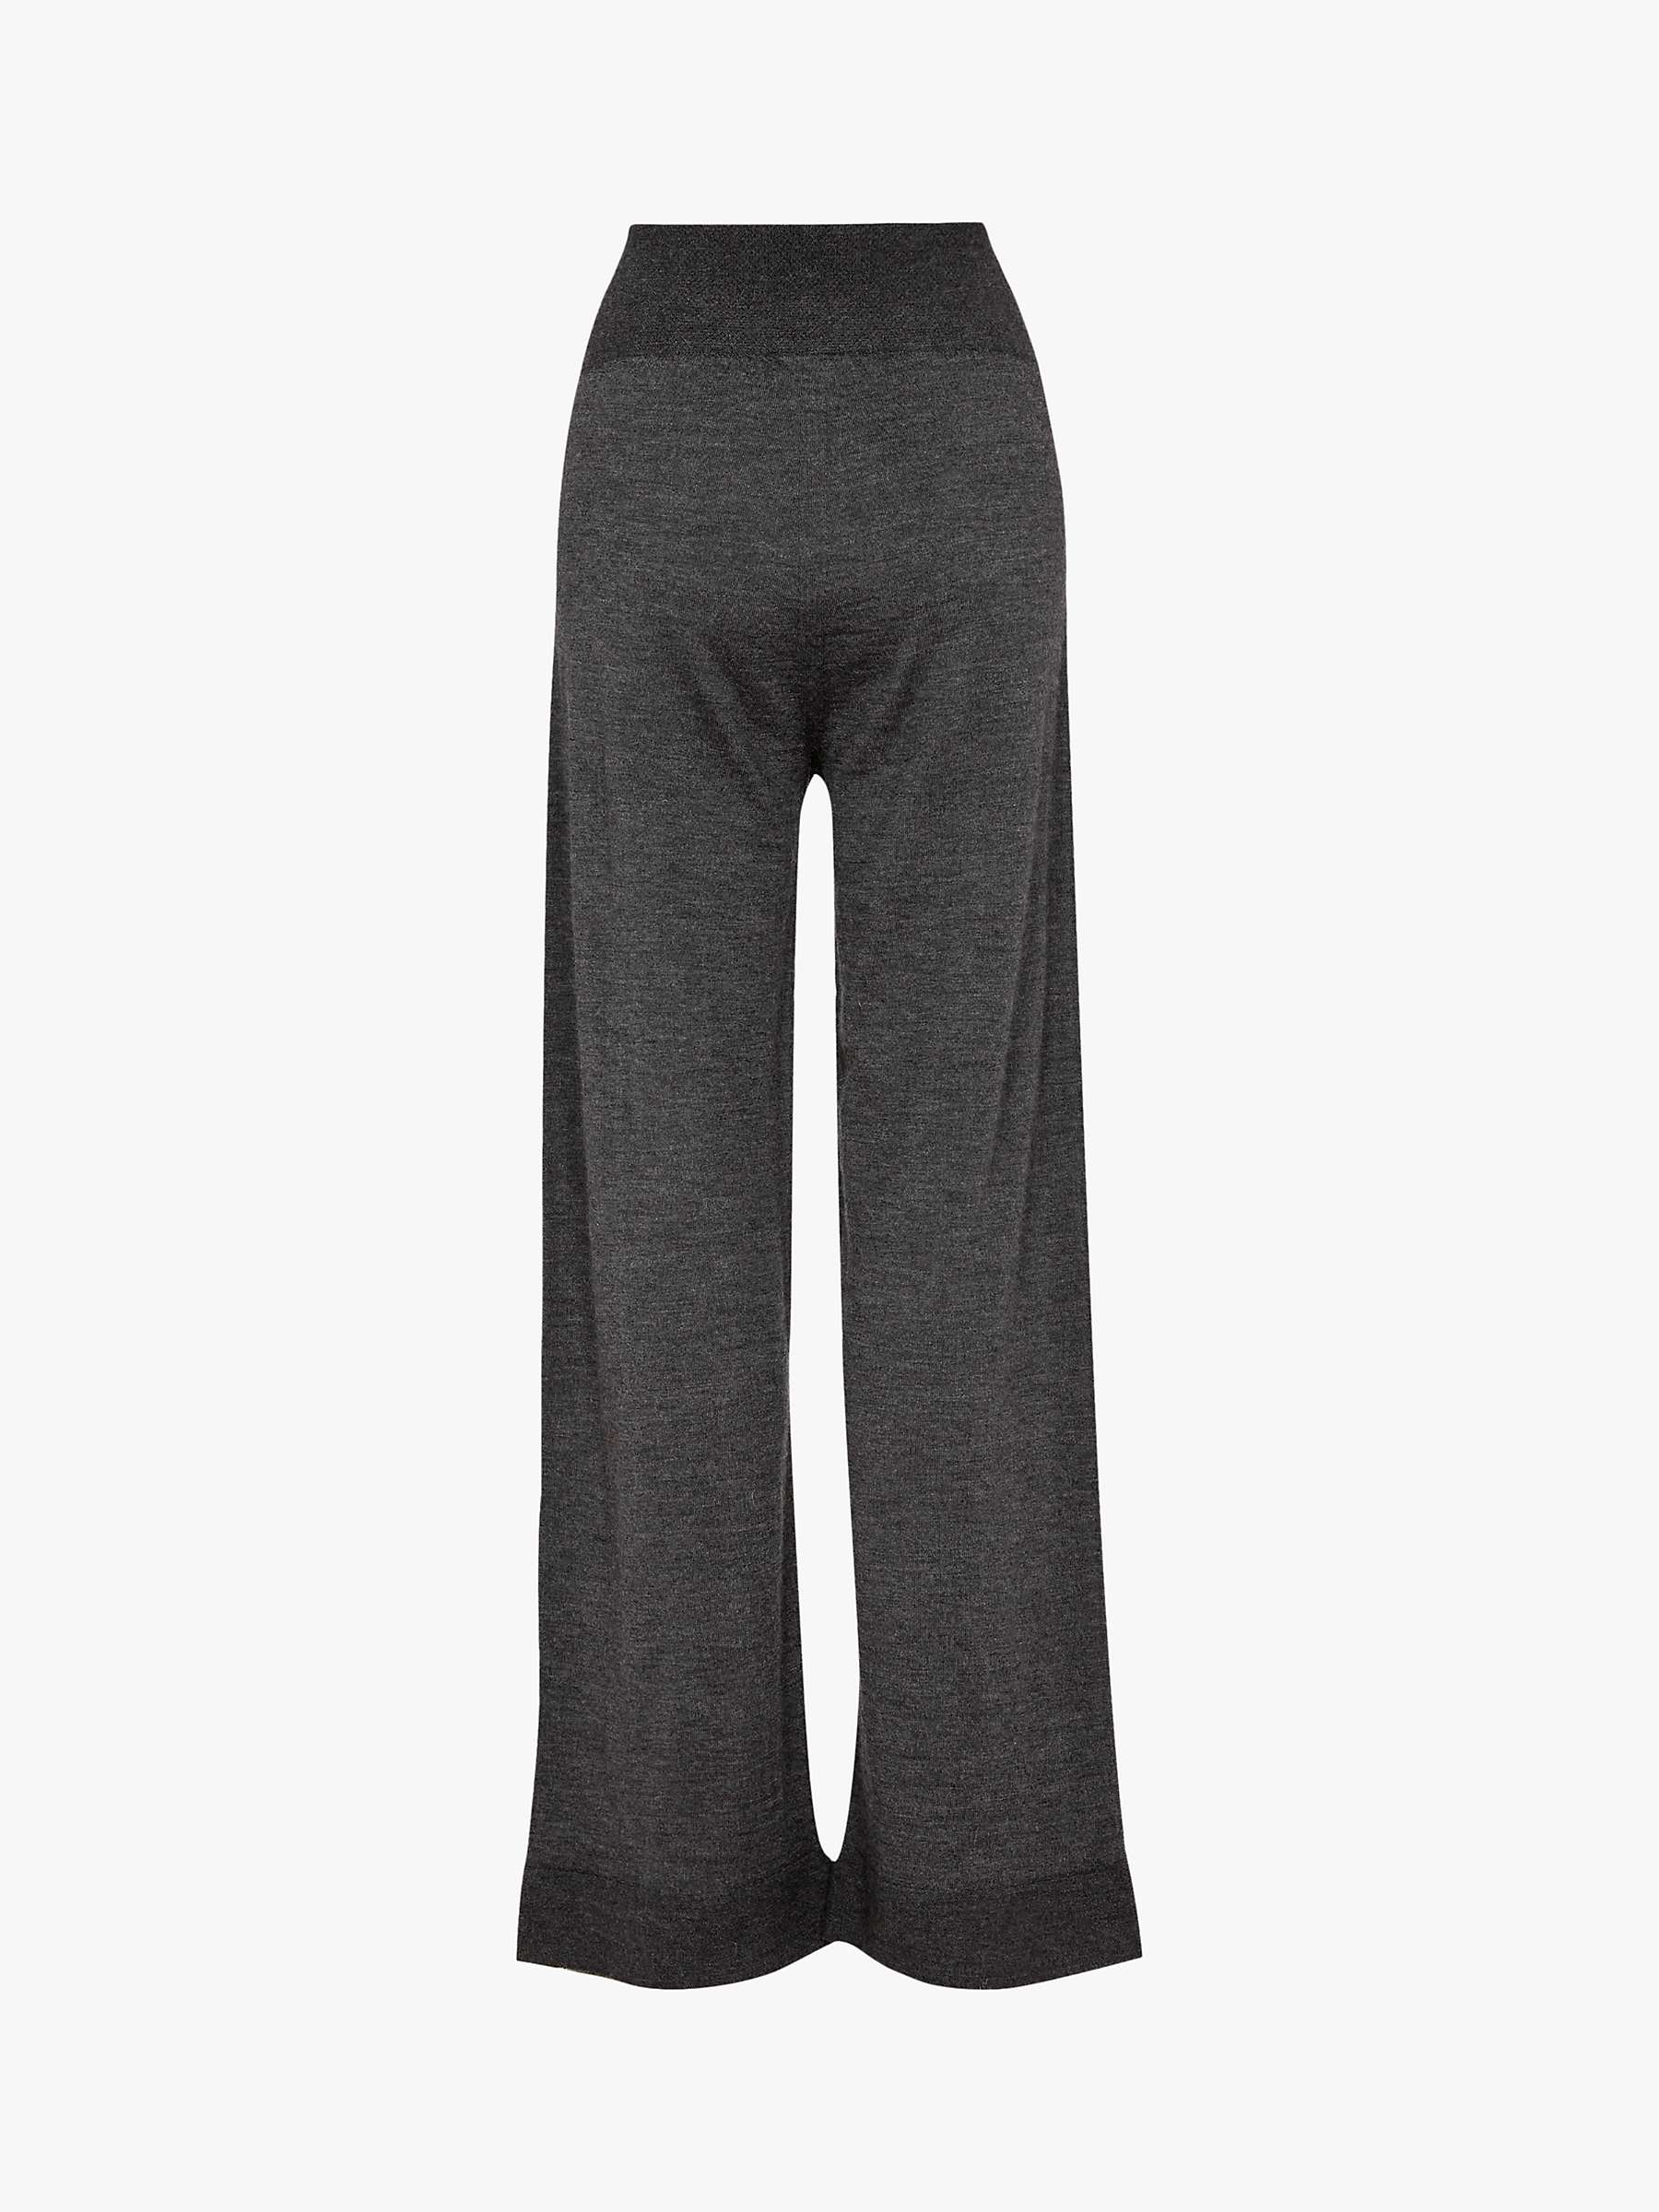 Buy Celtic & Co. Wool Lounge Trousers Online at johnlewis.com